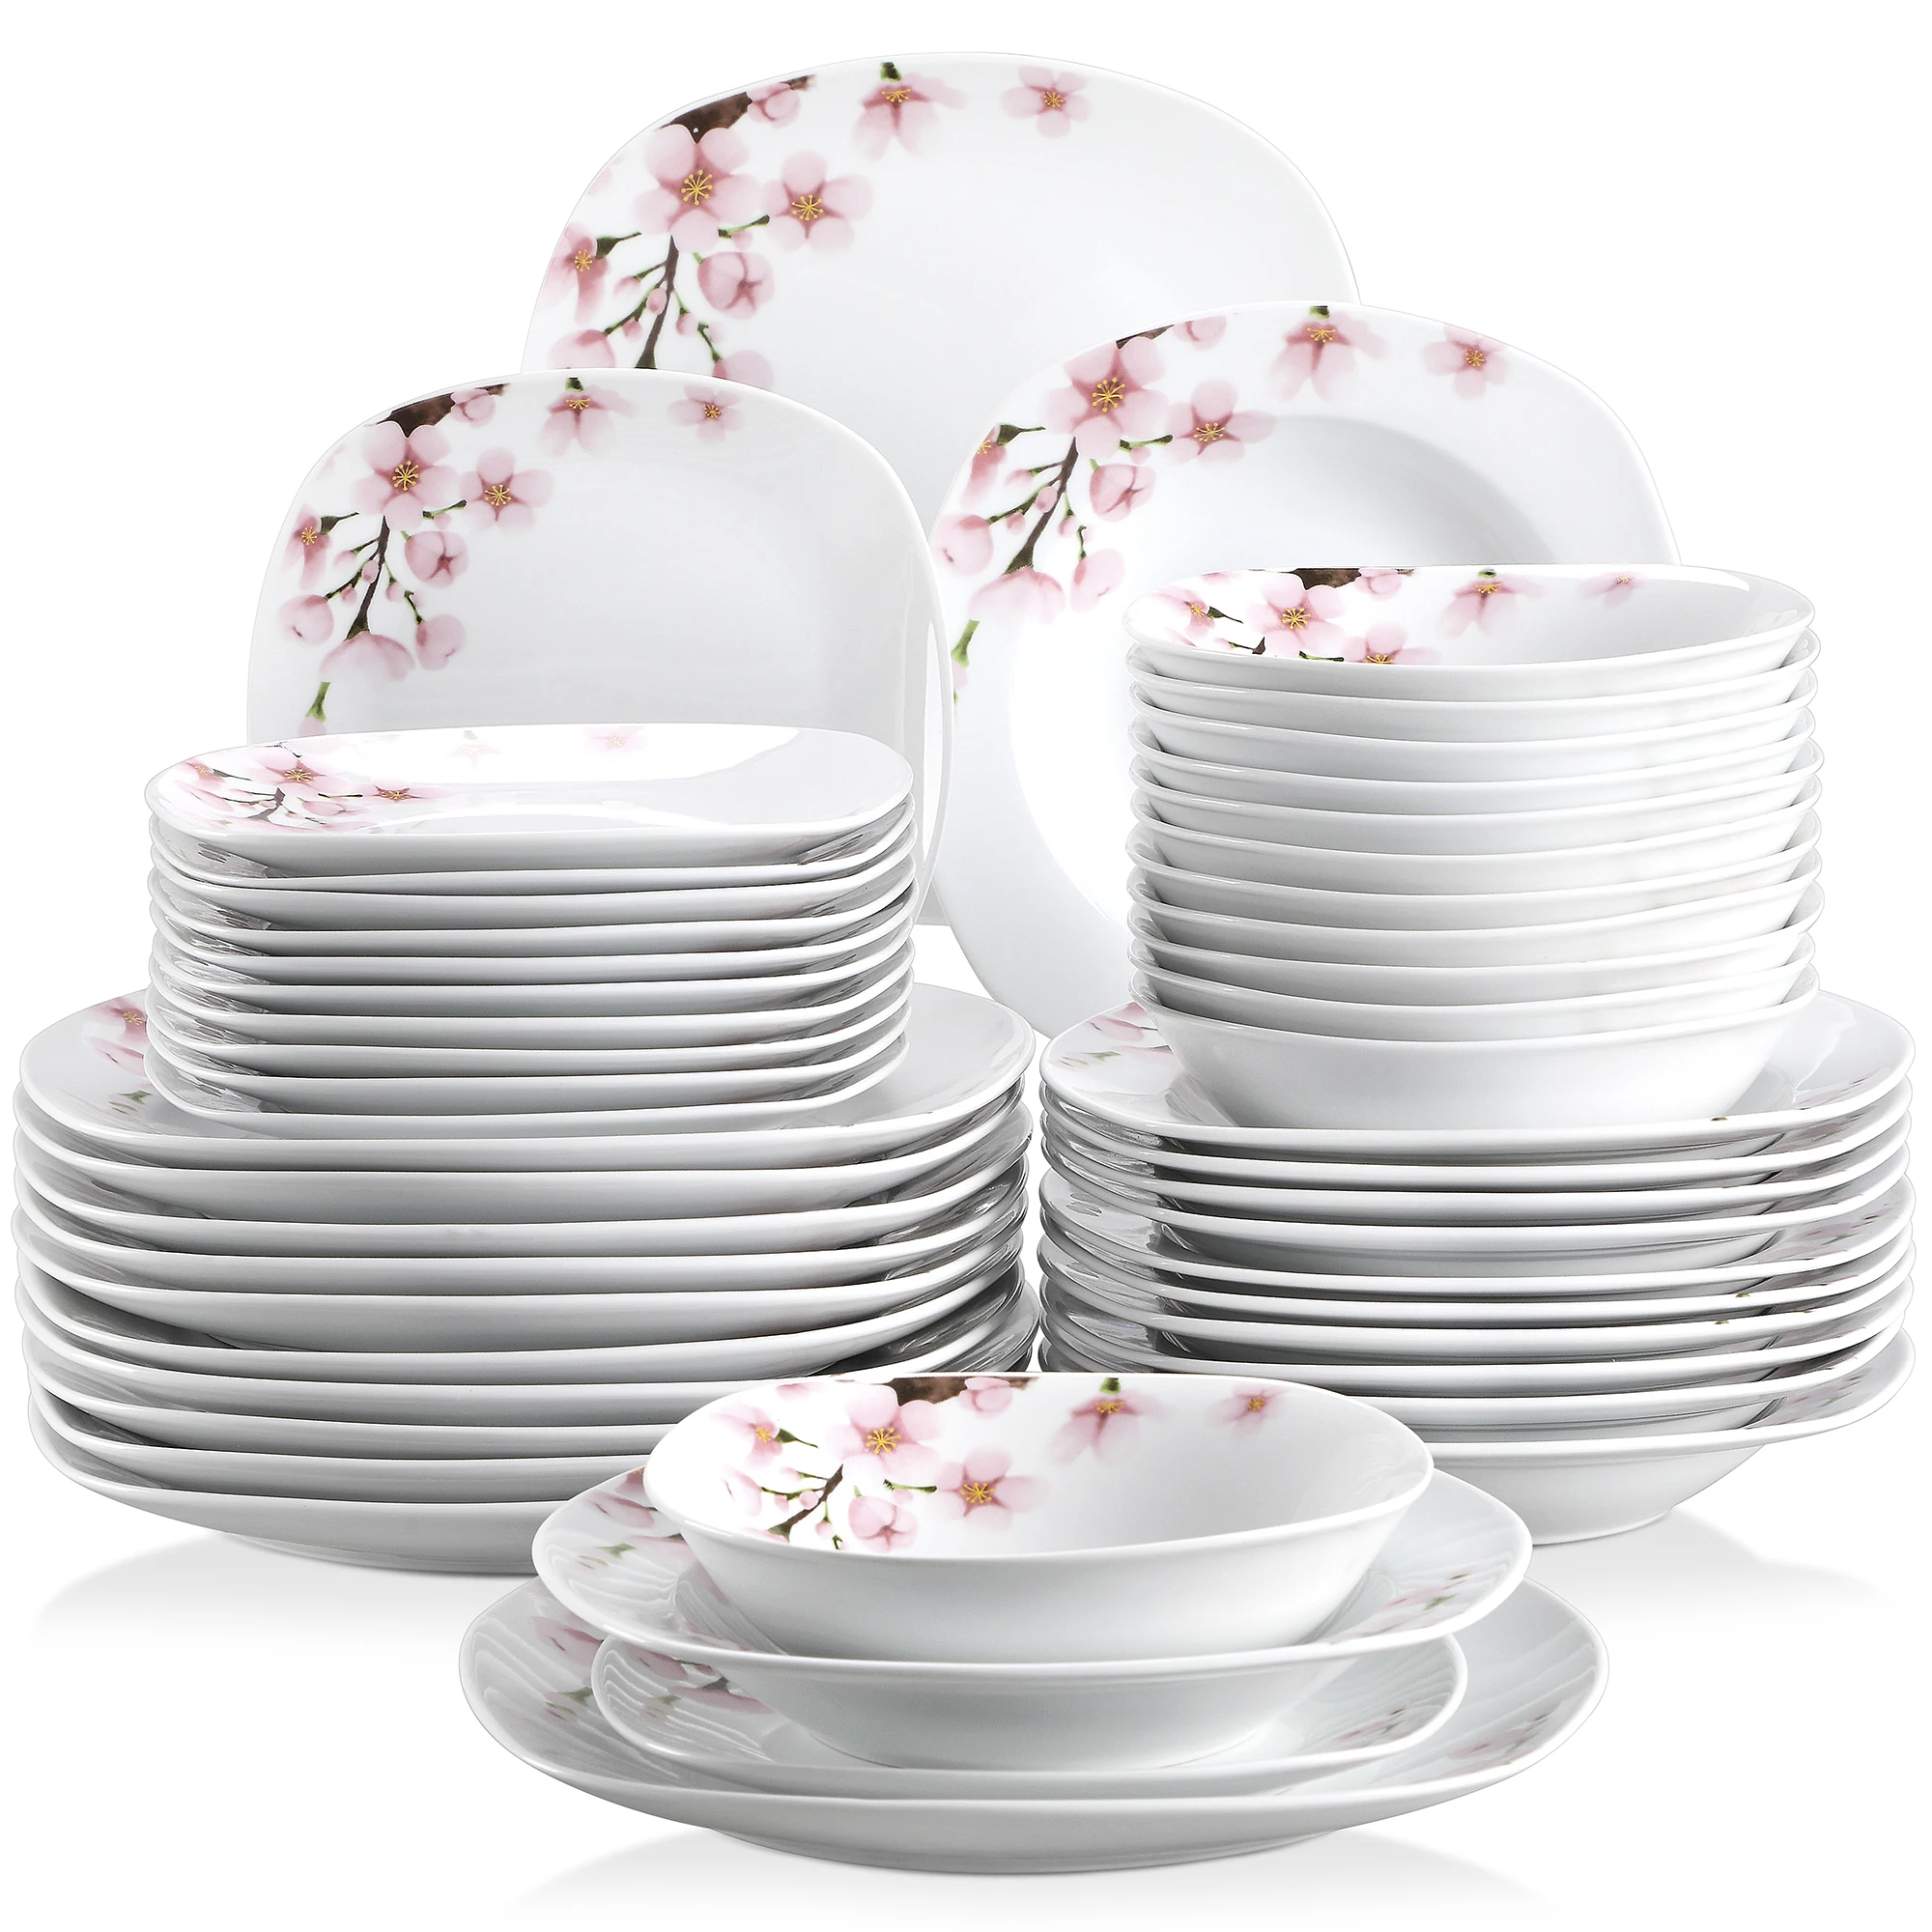 VEWEET ANNIE 48-Piece Porcelain China Ceramic Tableware Dinner Plate Set with Bowl,Dessert Plate,Soup Plate,Dinner Plates